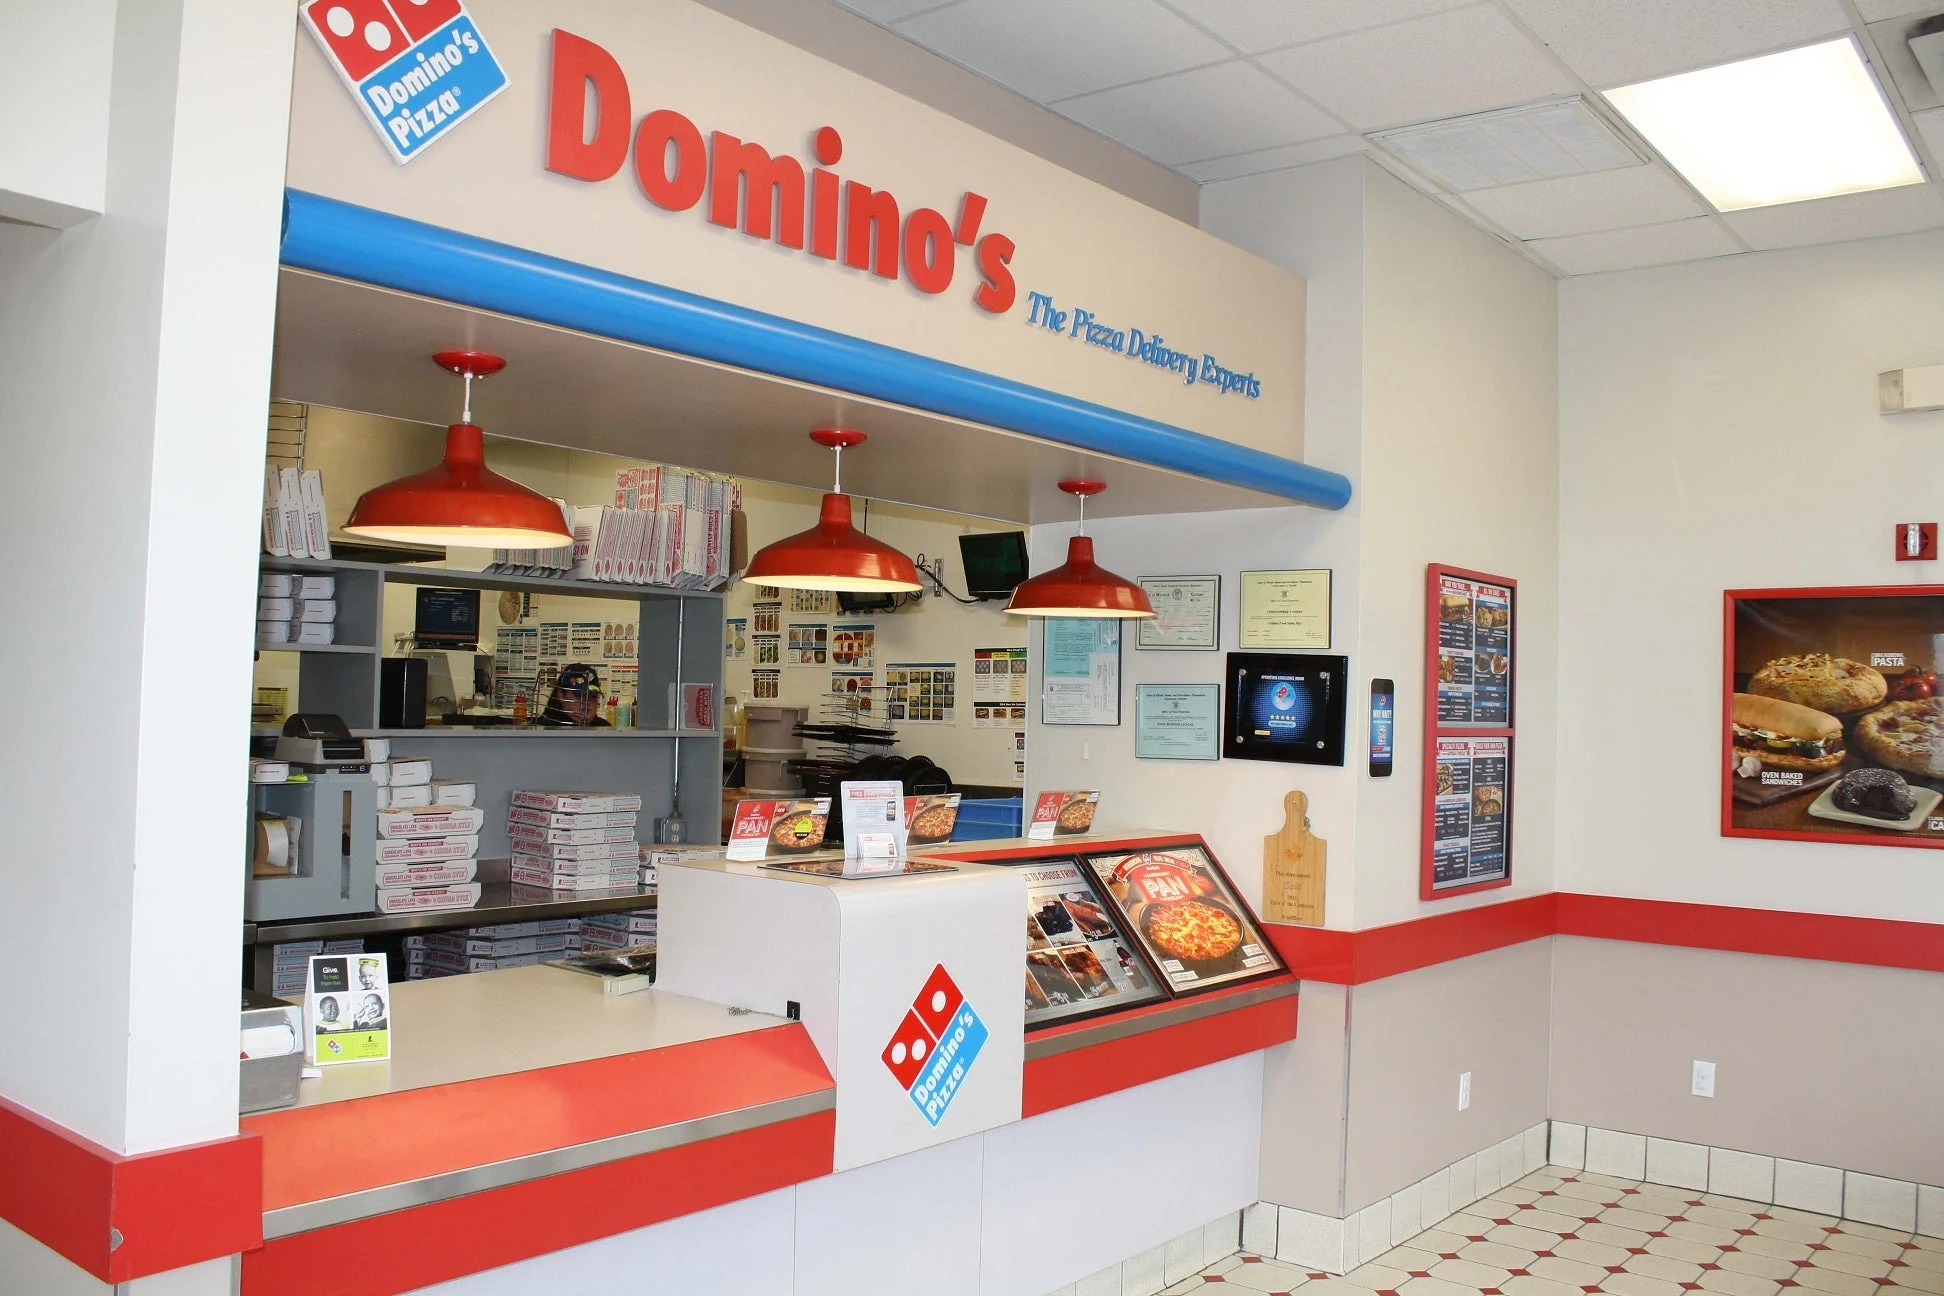 Domino's outlet